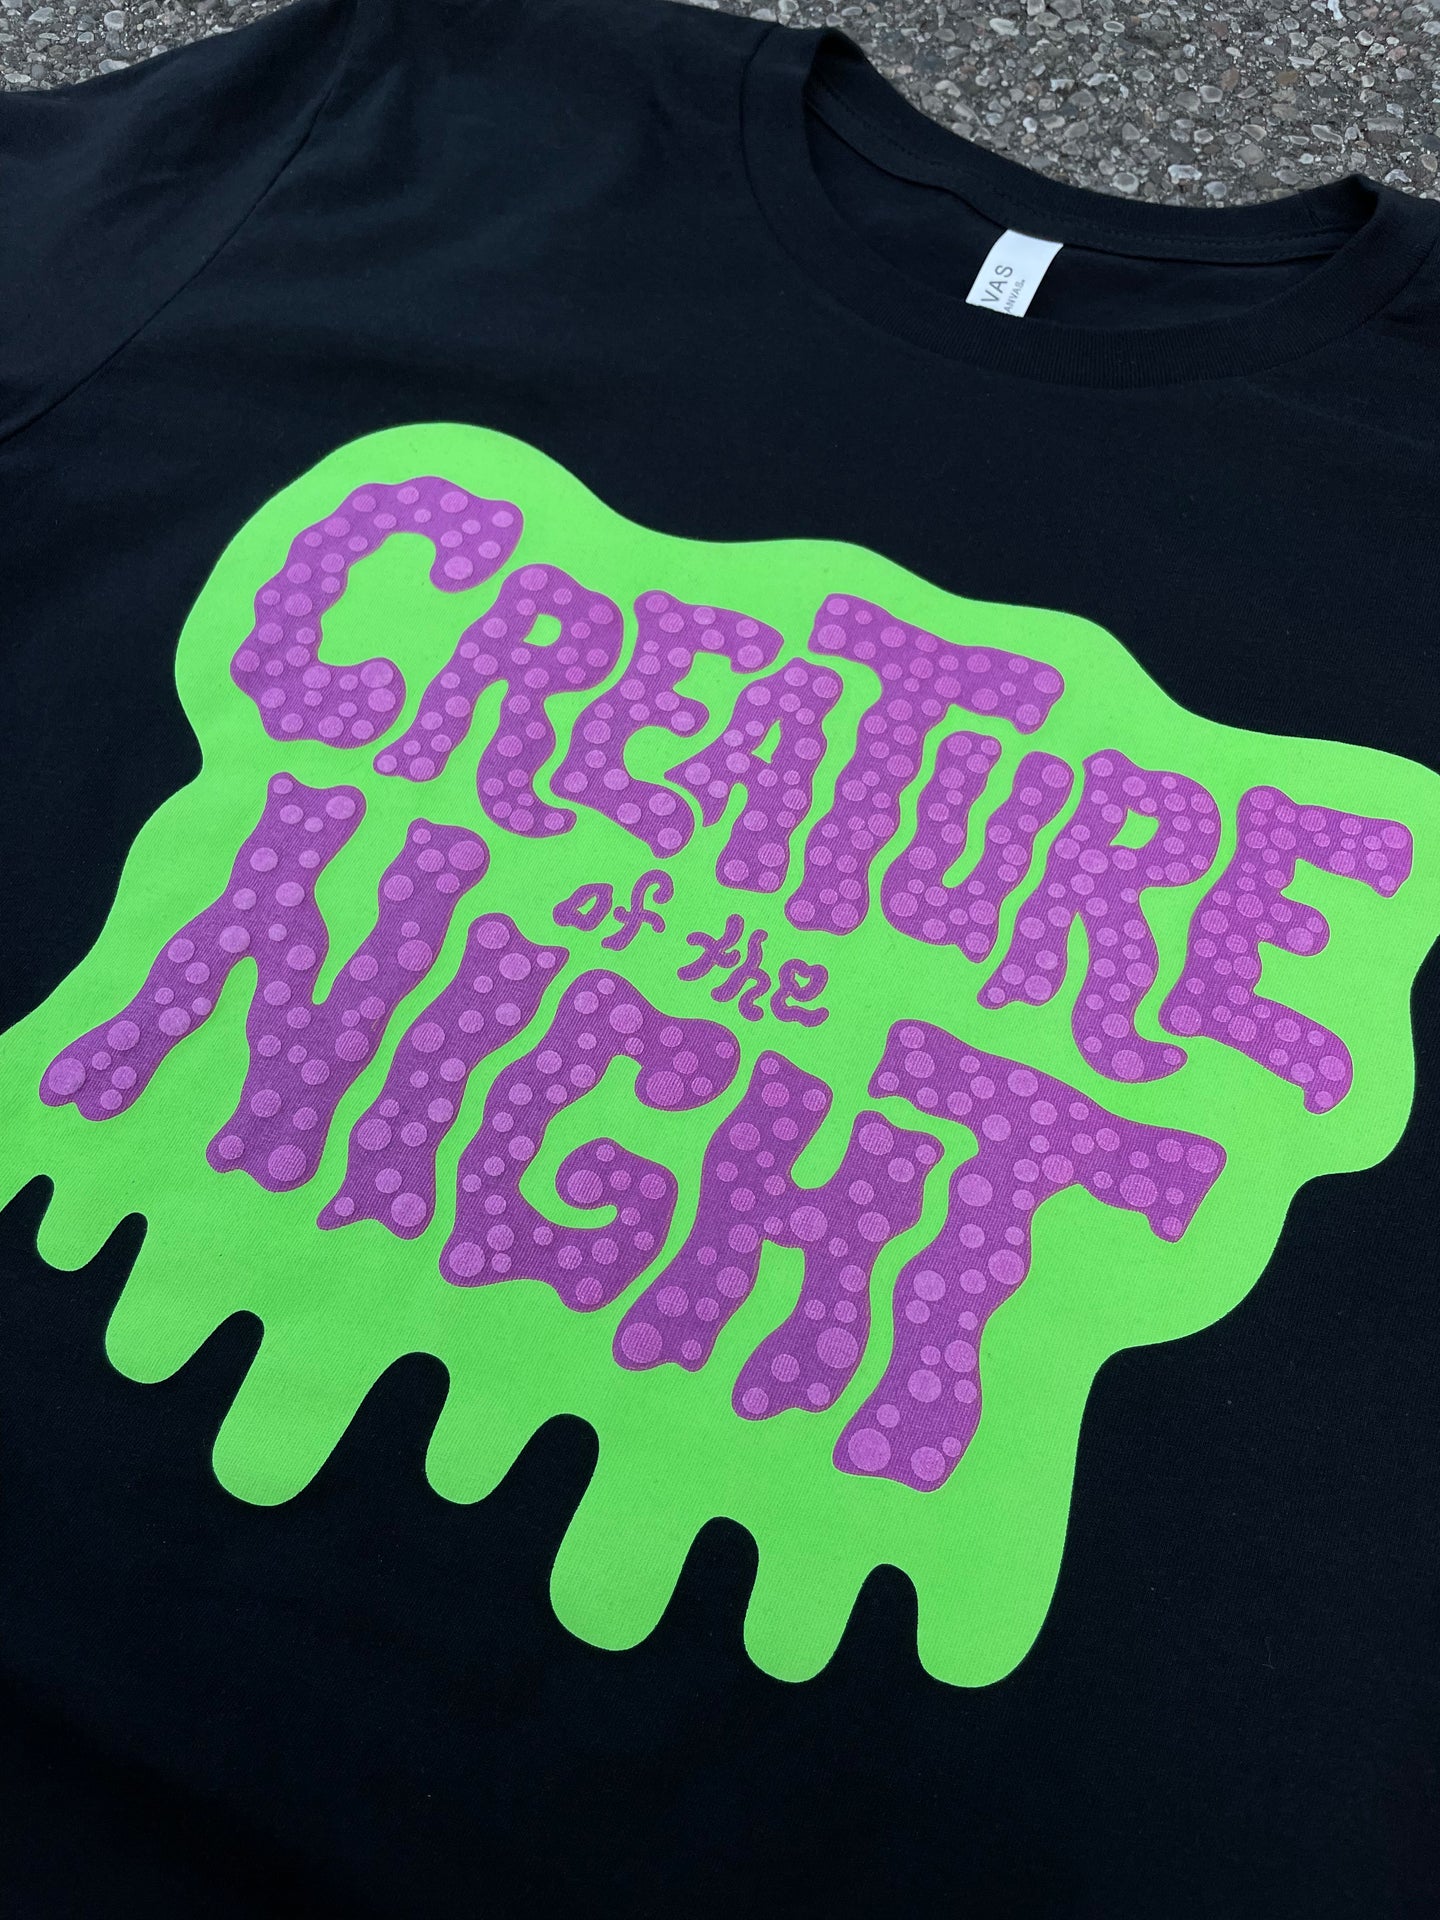 Creature of the Night: Glow + Goosebumps T-shirt (special edition!)